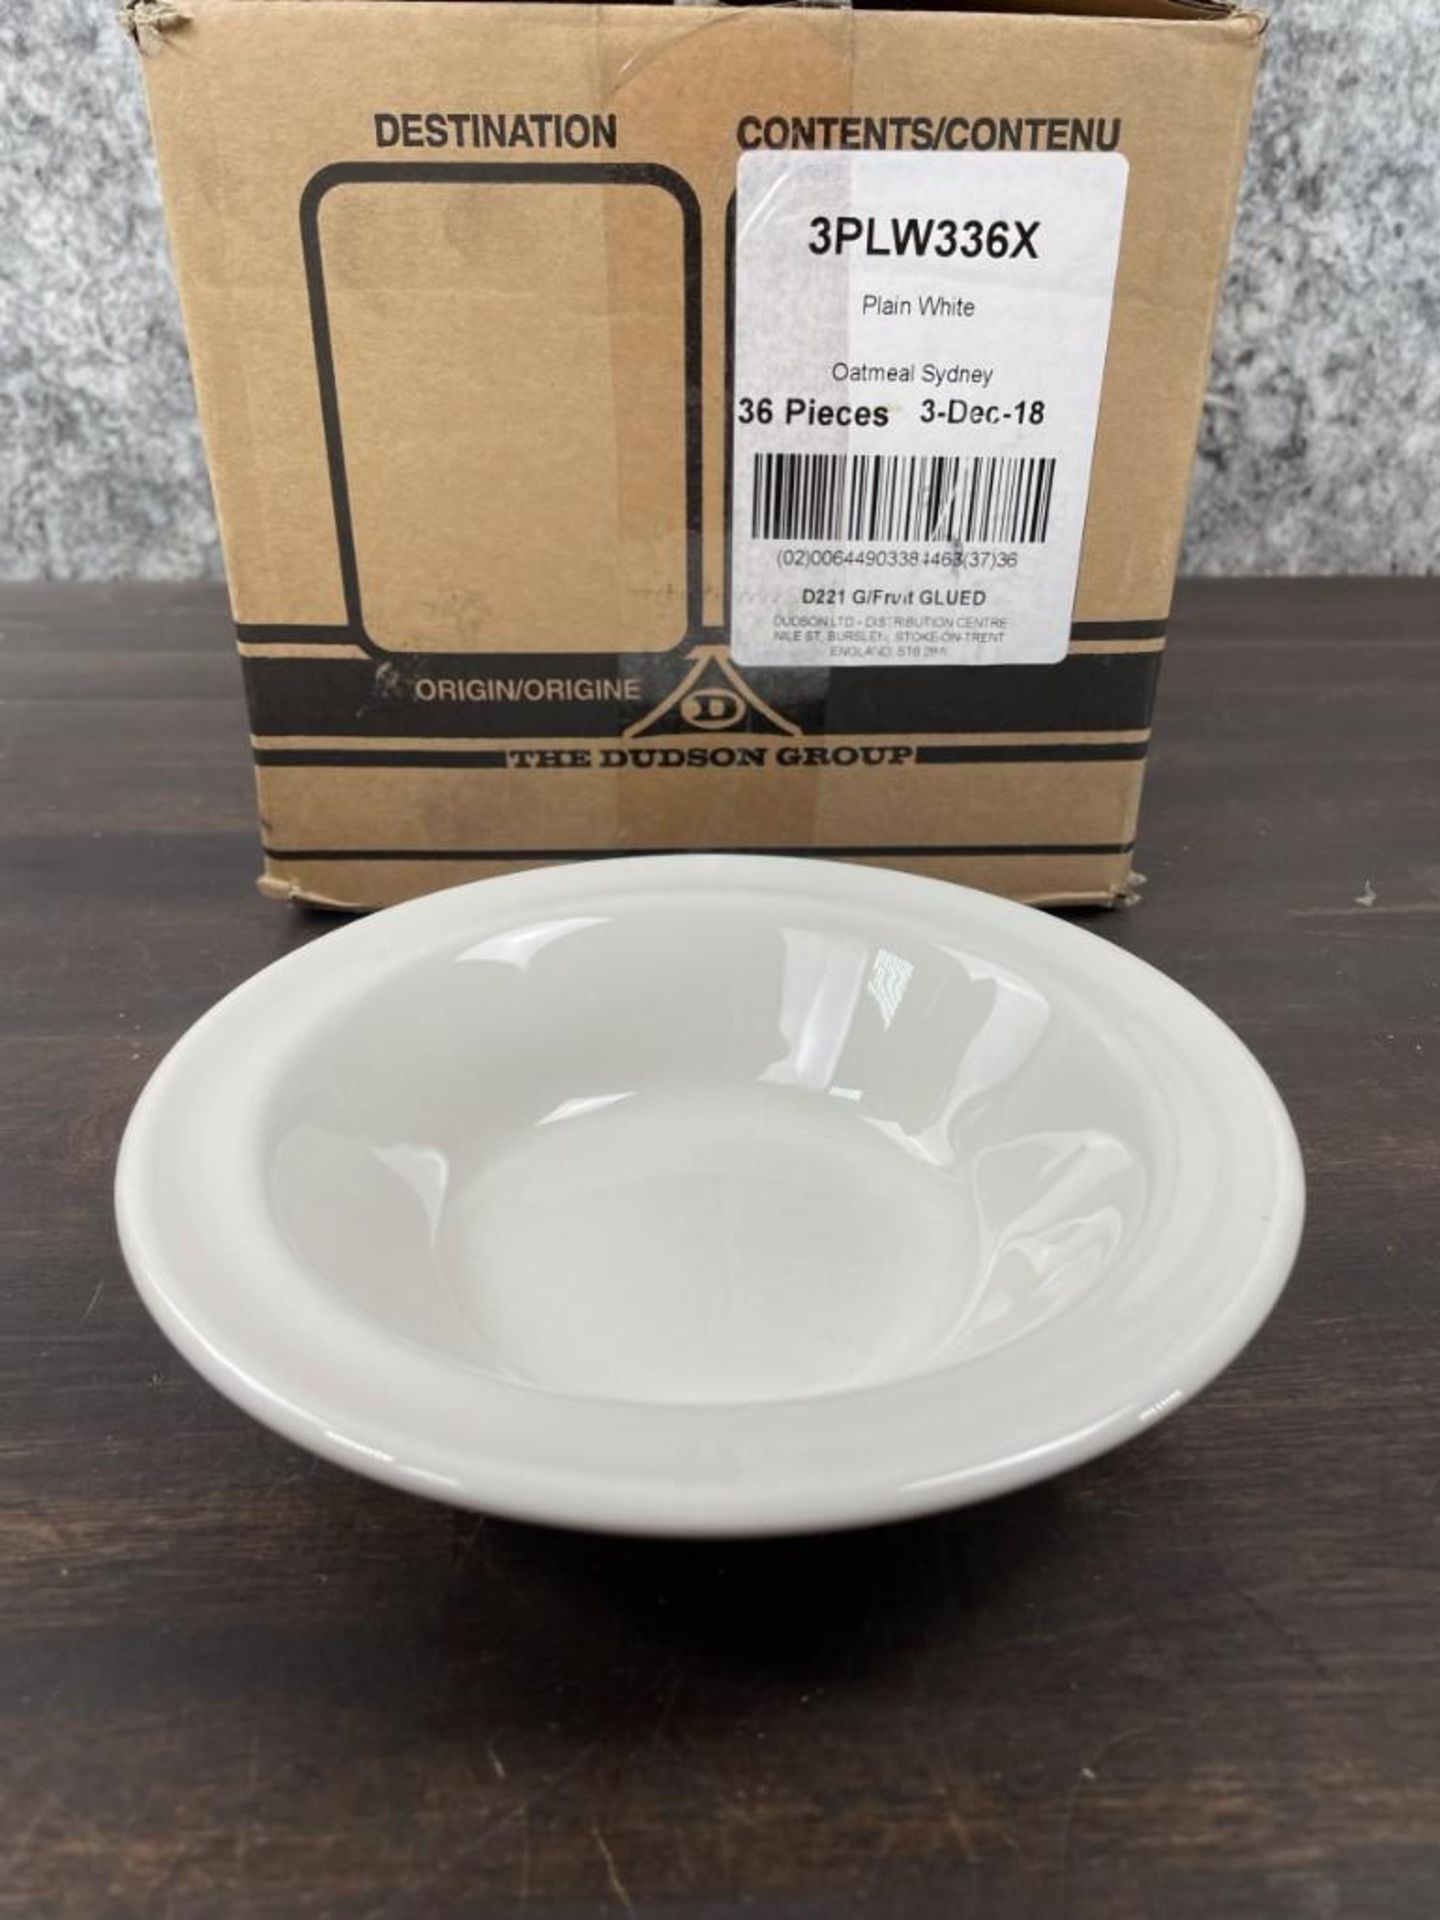 DUDSON CLASSIC 6-3/8" OATMEAL BOWLS - LOT OF 72 (2 CASES)